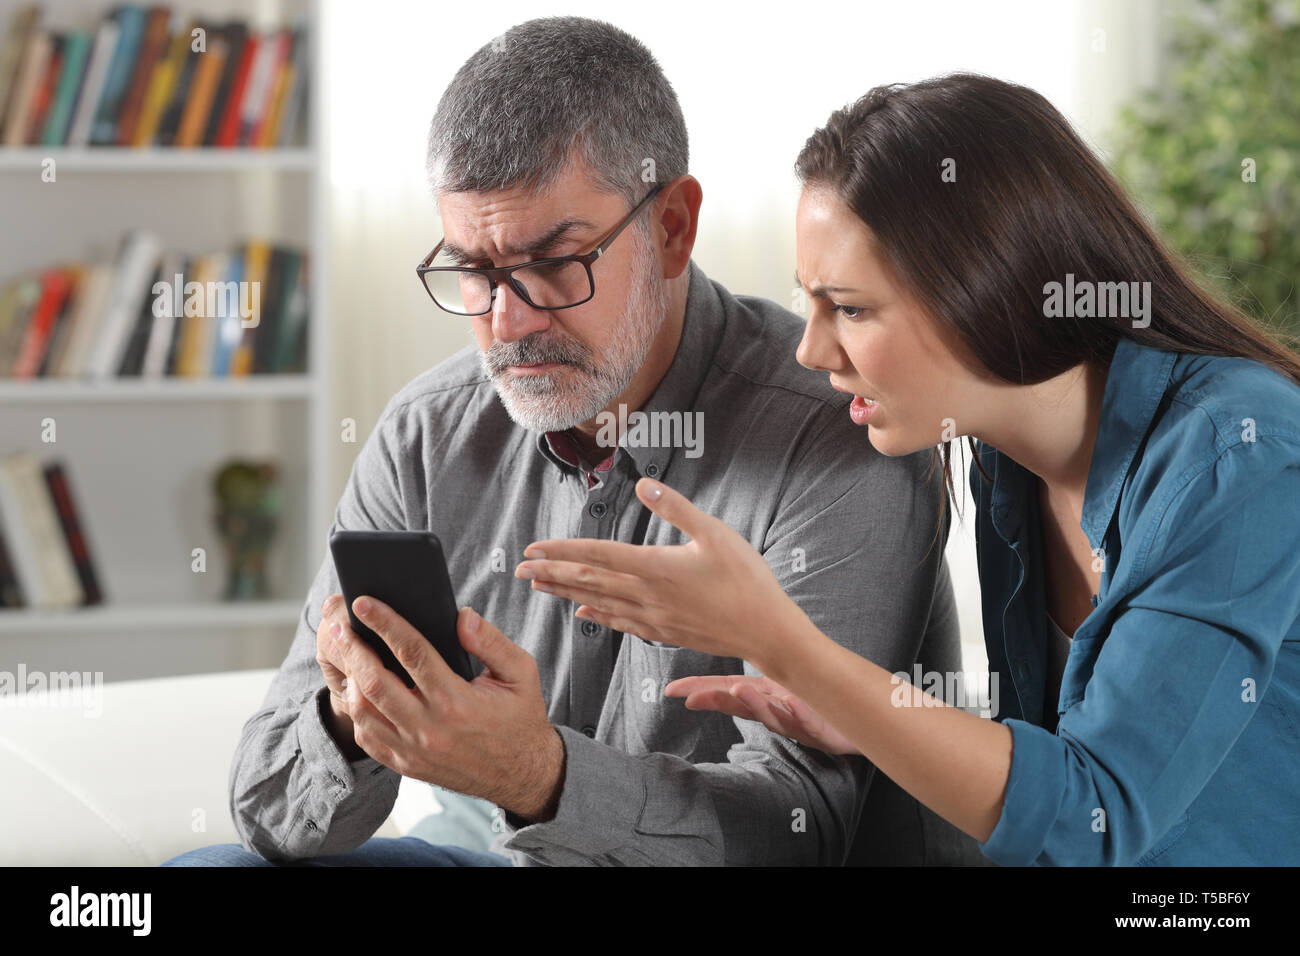 Confused father and daughter trying to use a smart phone sitting on a couch at home Stock Photo